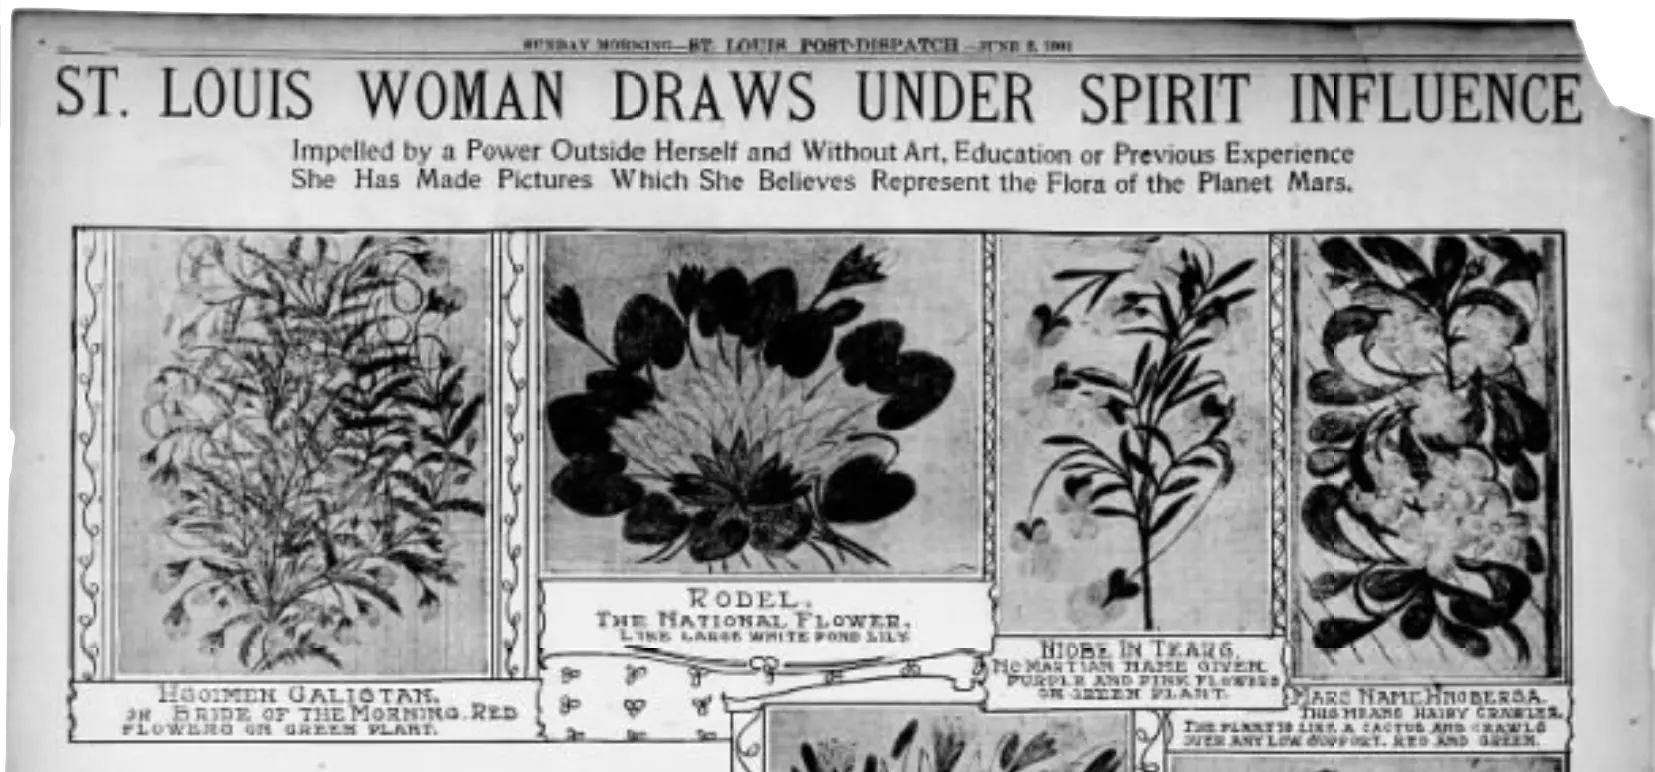 Interview with Sara Weiss in the St. Louis Dispatch, 1901